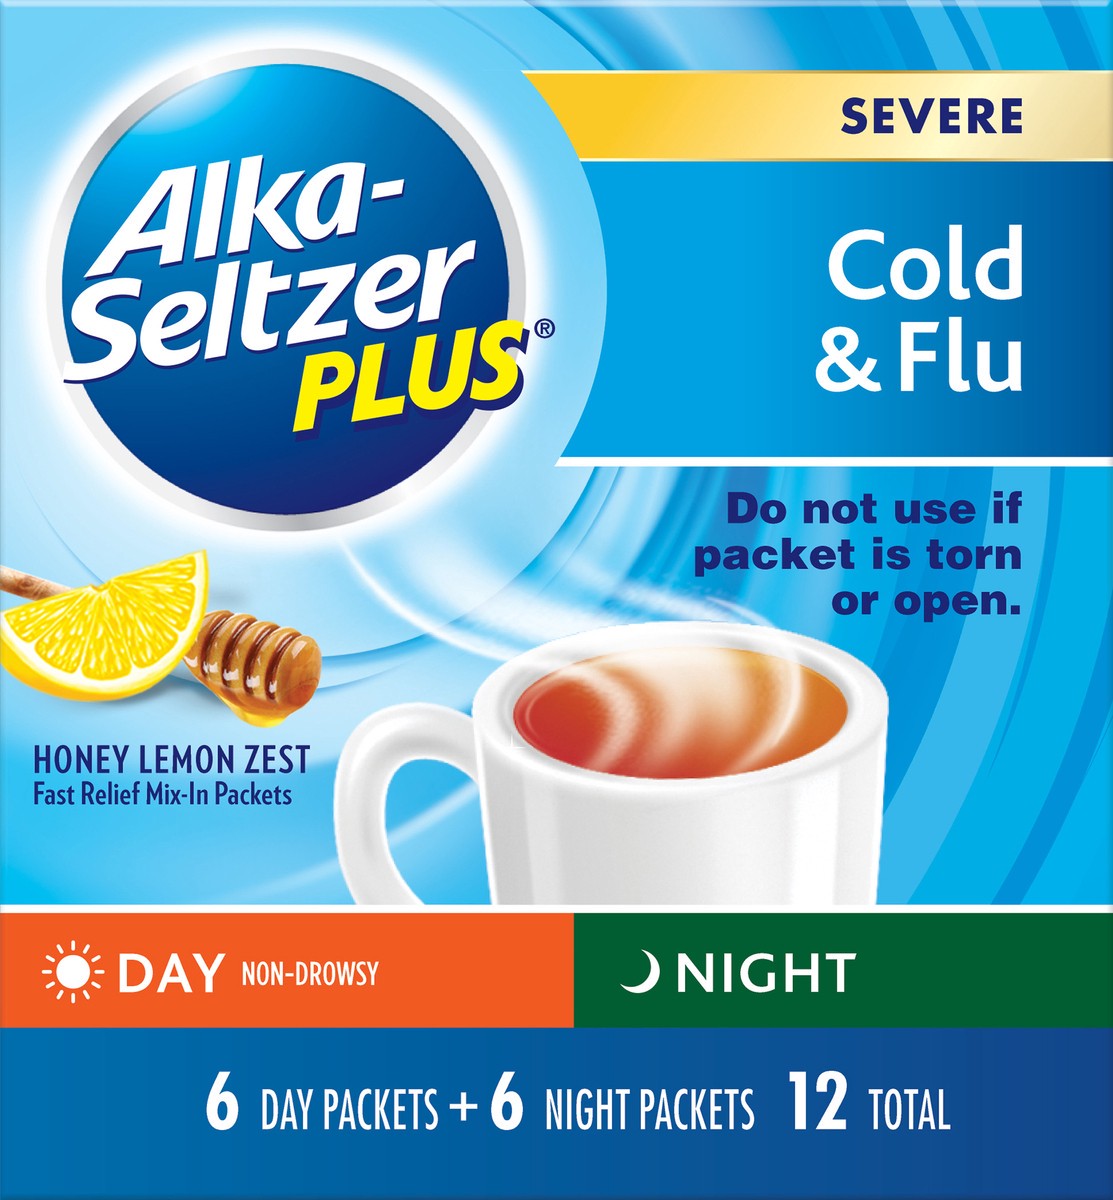 slide 7 of 7, Alka-Seltzer Plus Severe Cold Flu Day Night Powder Packets, 12 ct